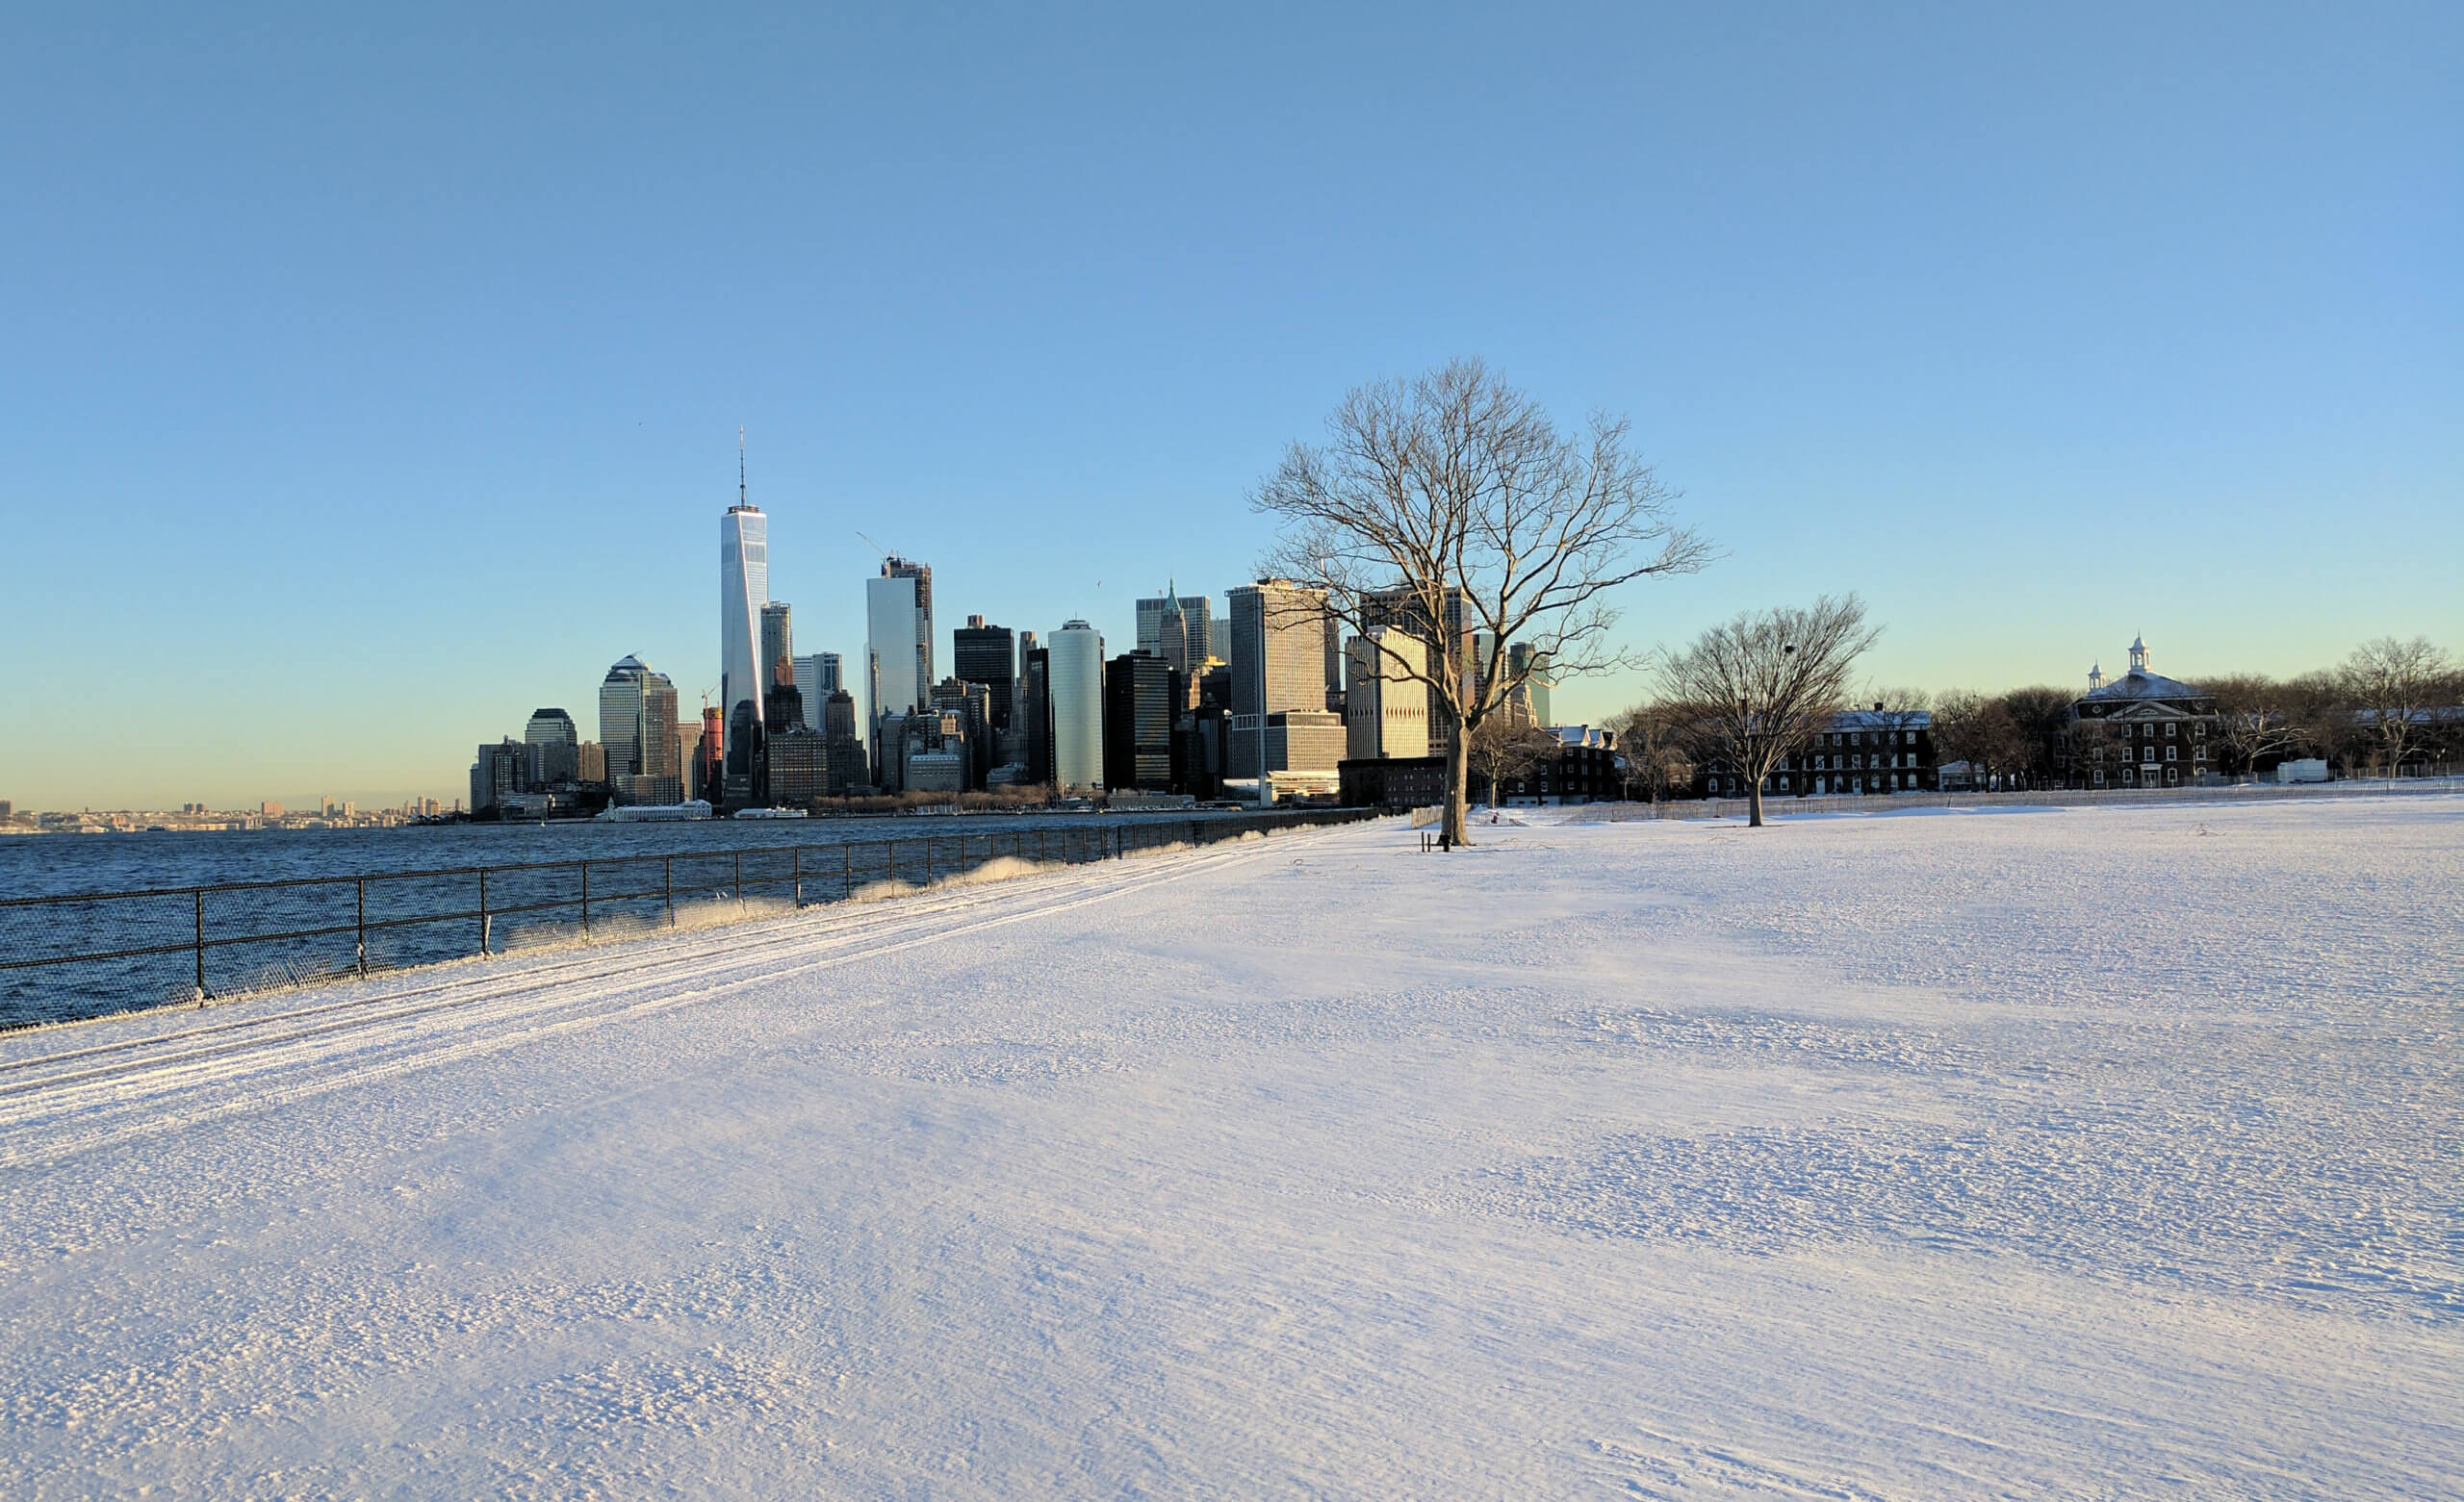 https://www.newyorkfamily.com/wp-content/uploads/2022/02/governors-island-ice-sculpture-event-scaled.jpg